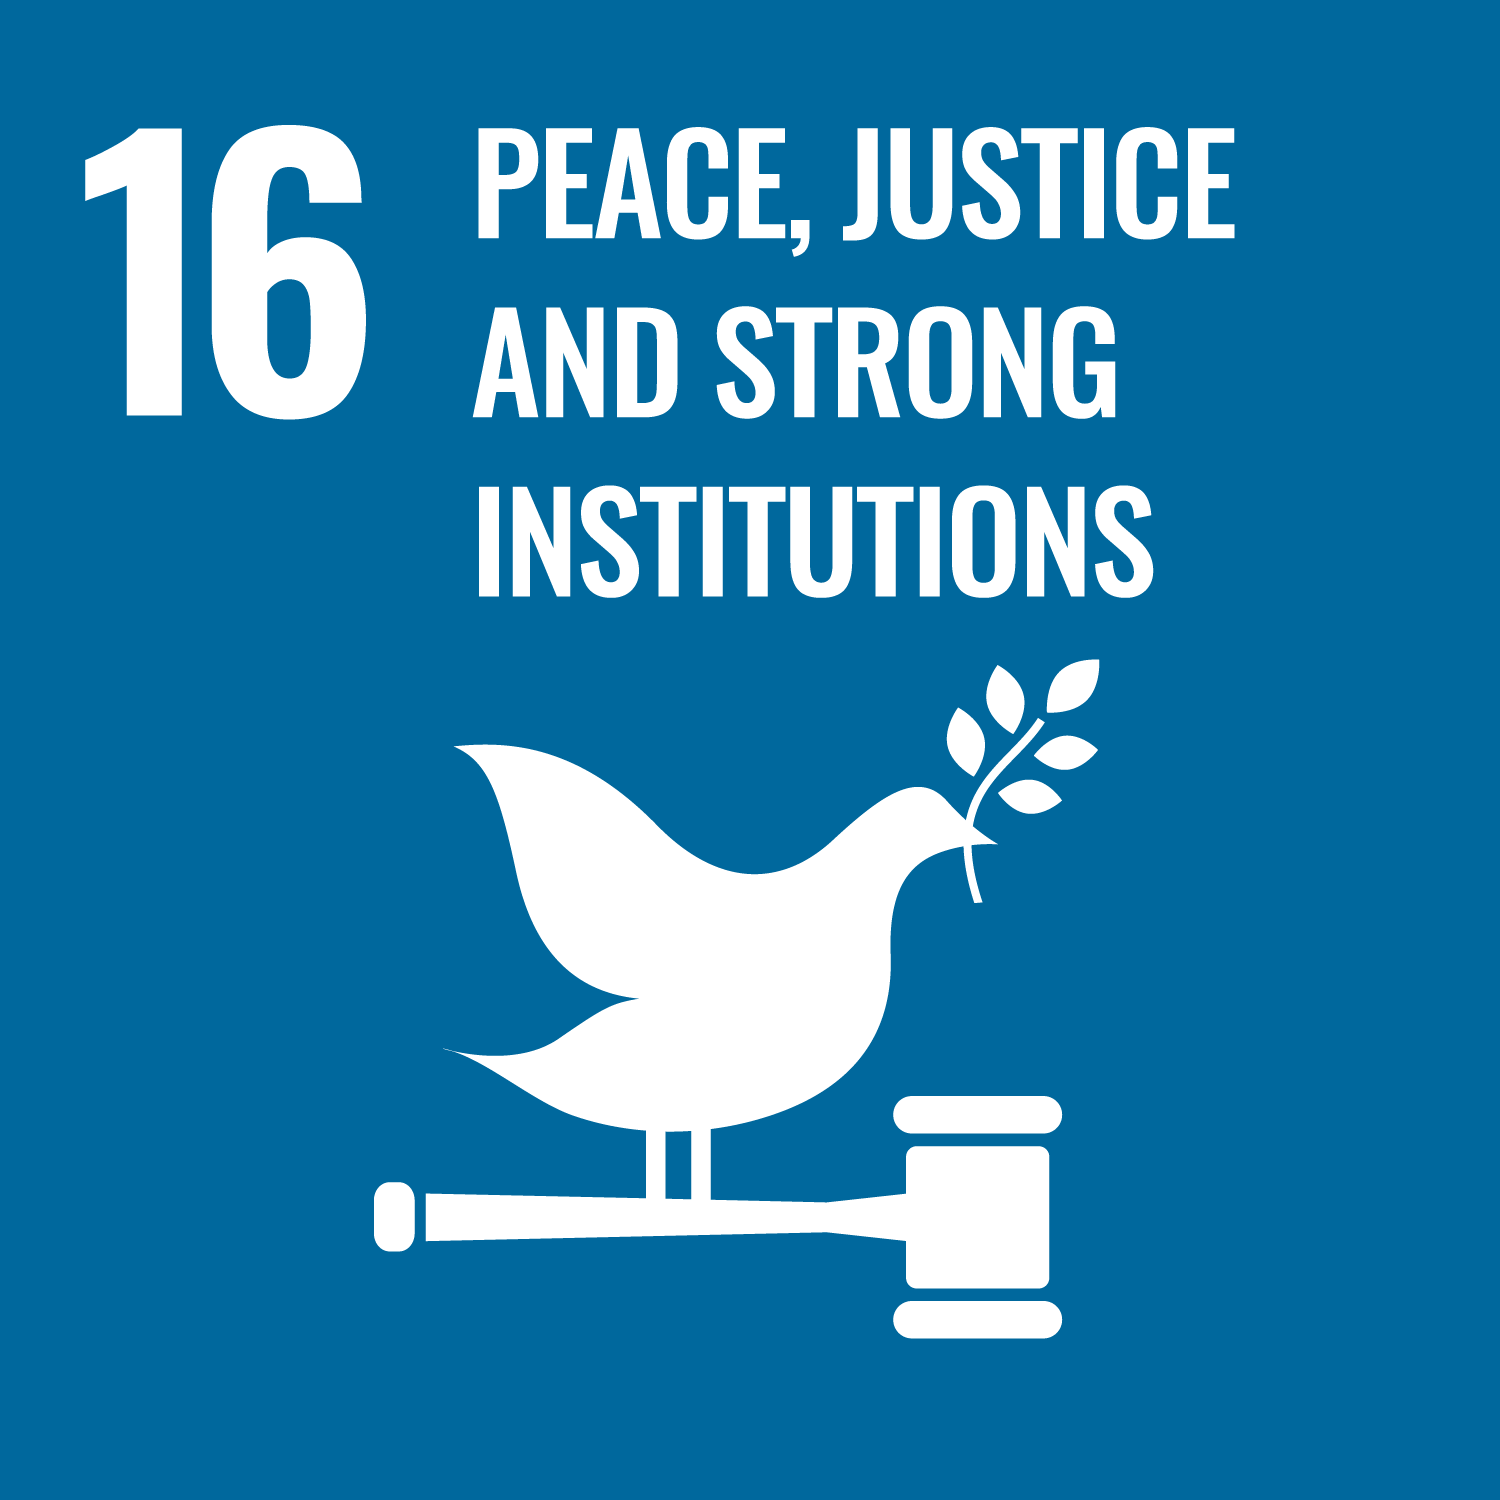 United Nations Sustainable Development Goal Number 16: Peace Justice and Strong Instritutions